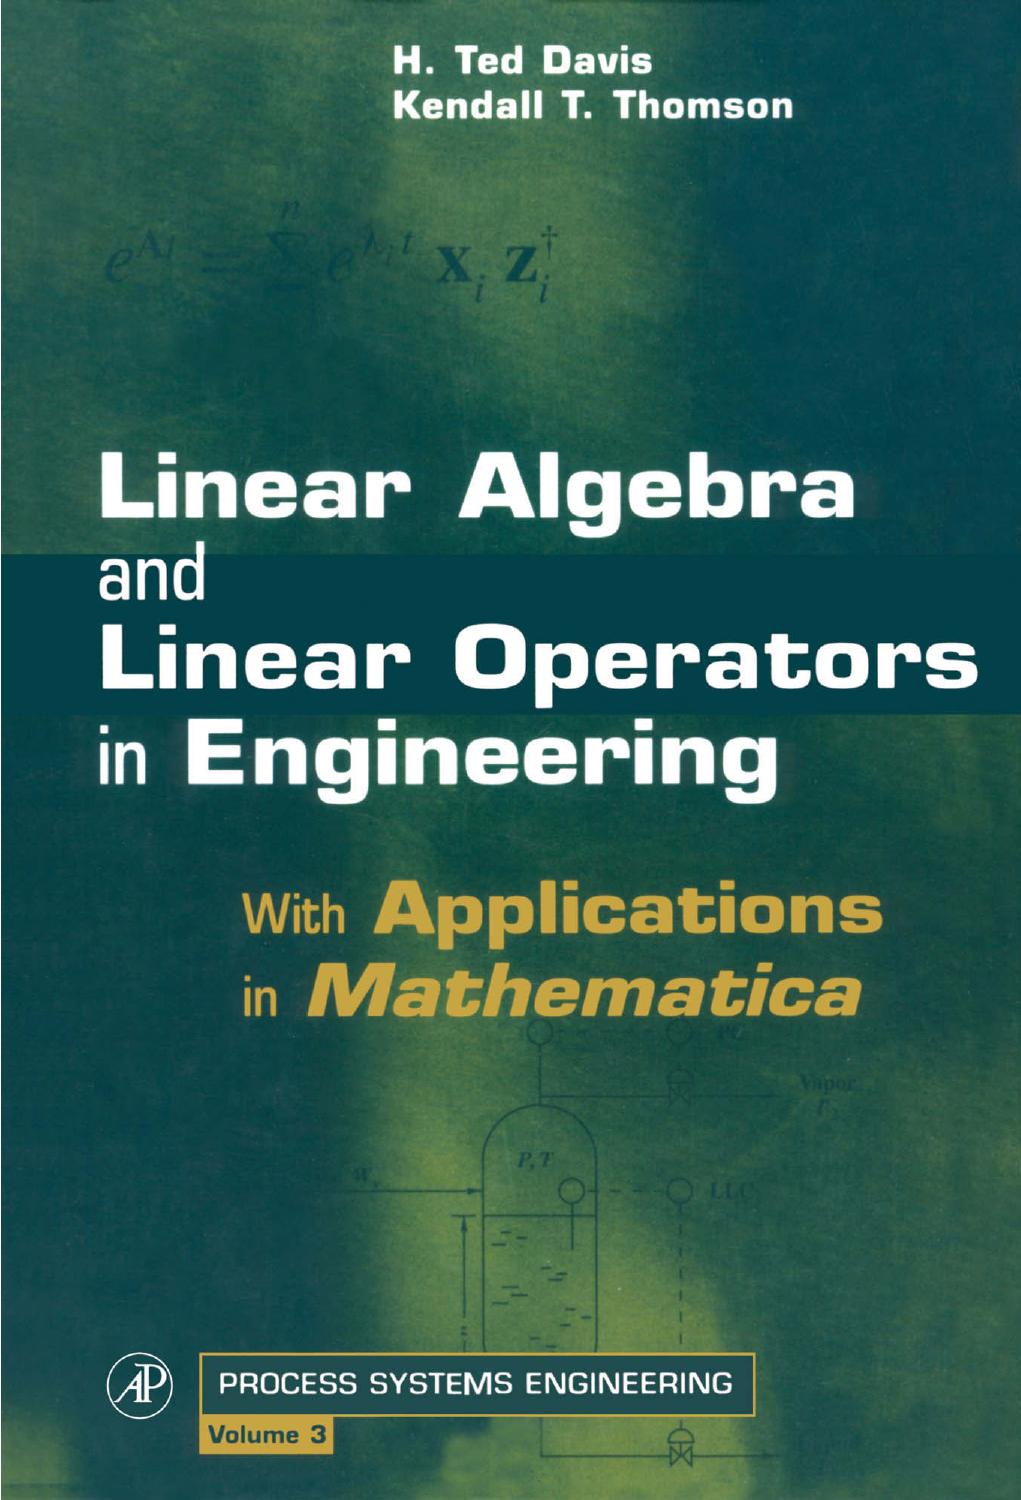 Linear Algebra and Linear Operators in Engineering: with Applications in Mathematica®